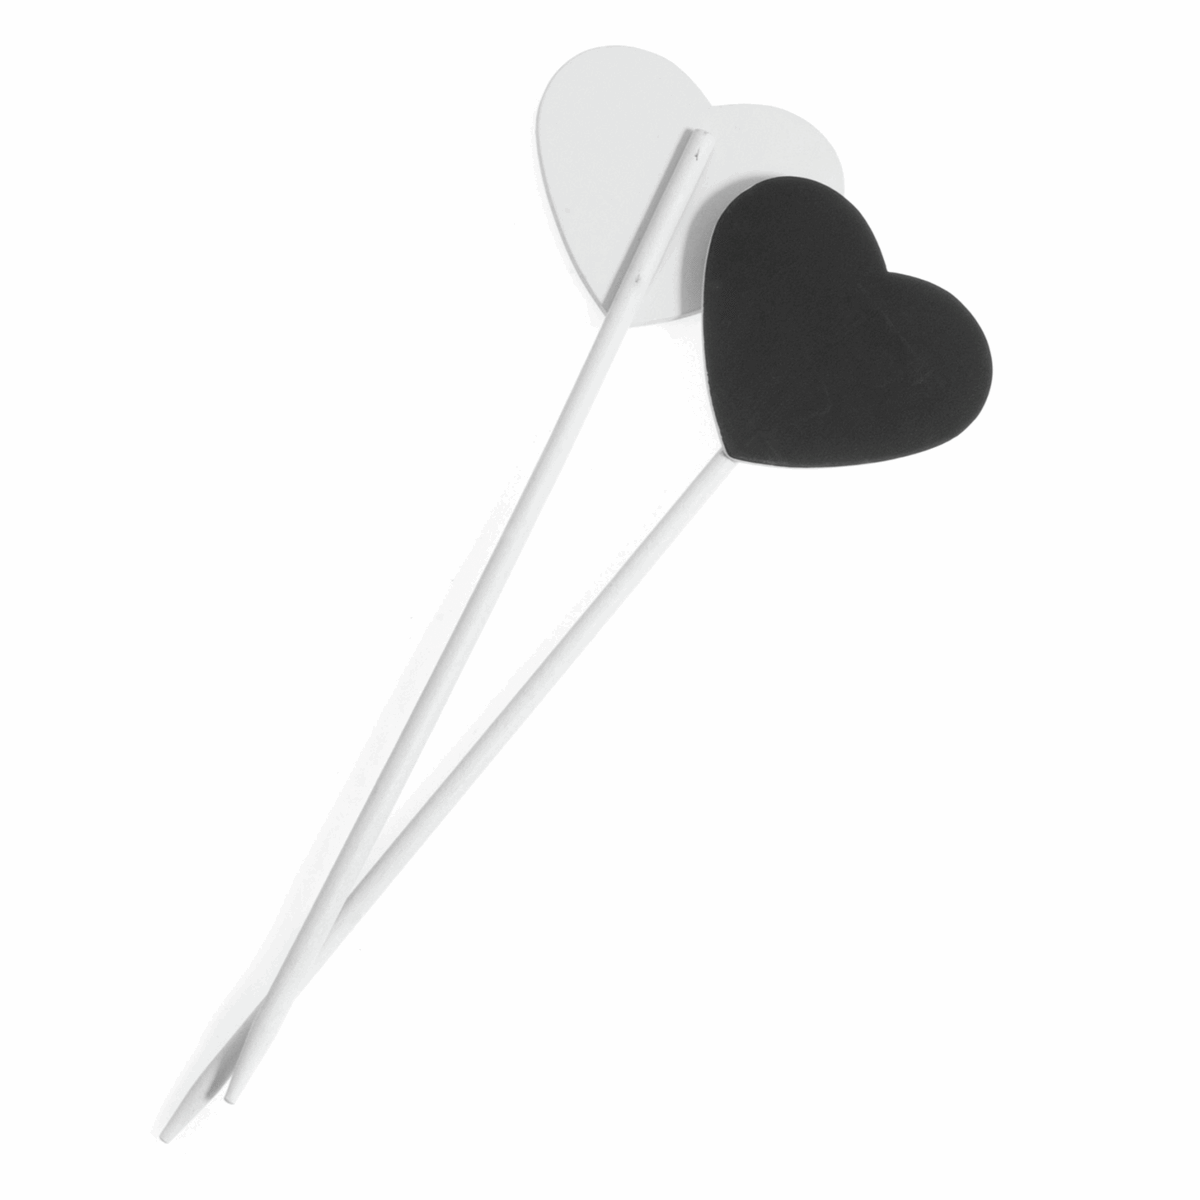 White Heart Shape Chalkboards on a Stick - 23 x 7cm (Pack of 2)